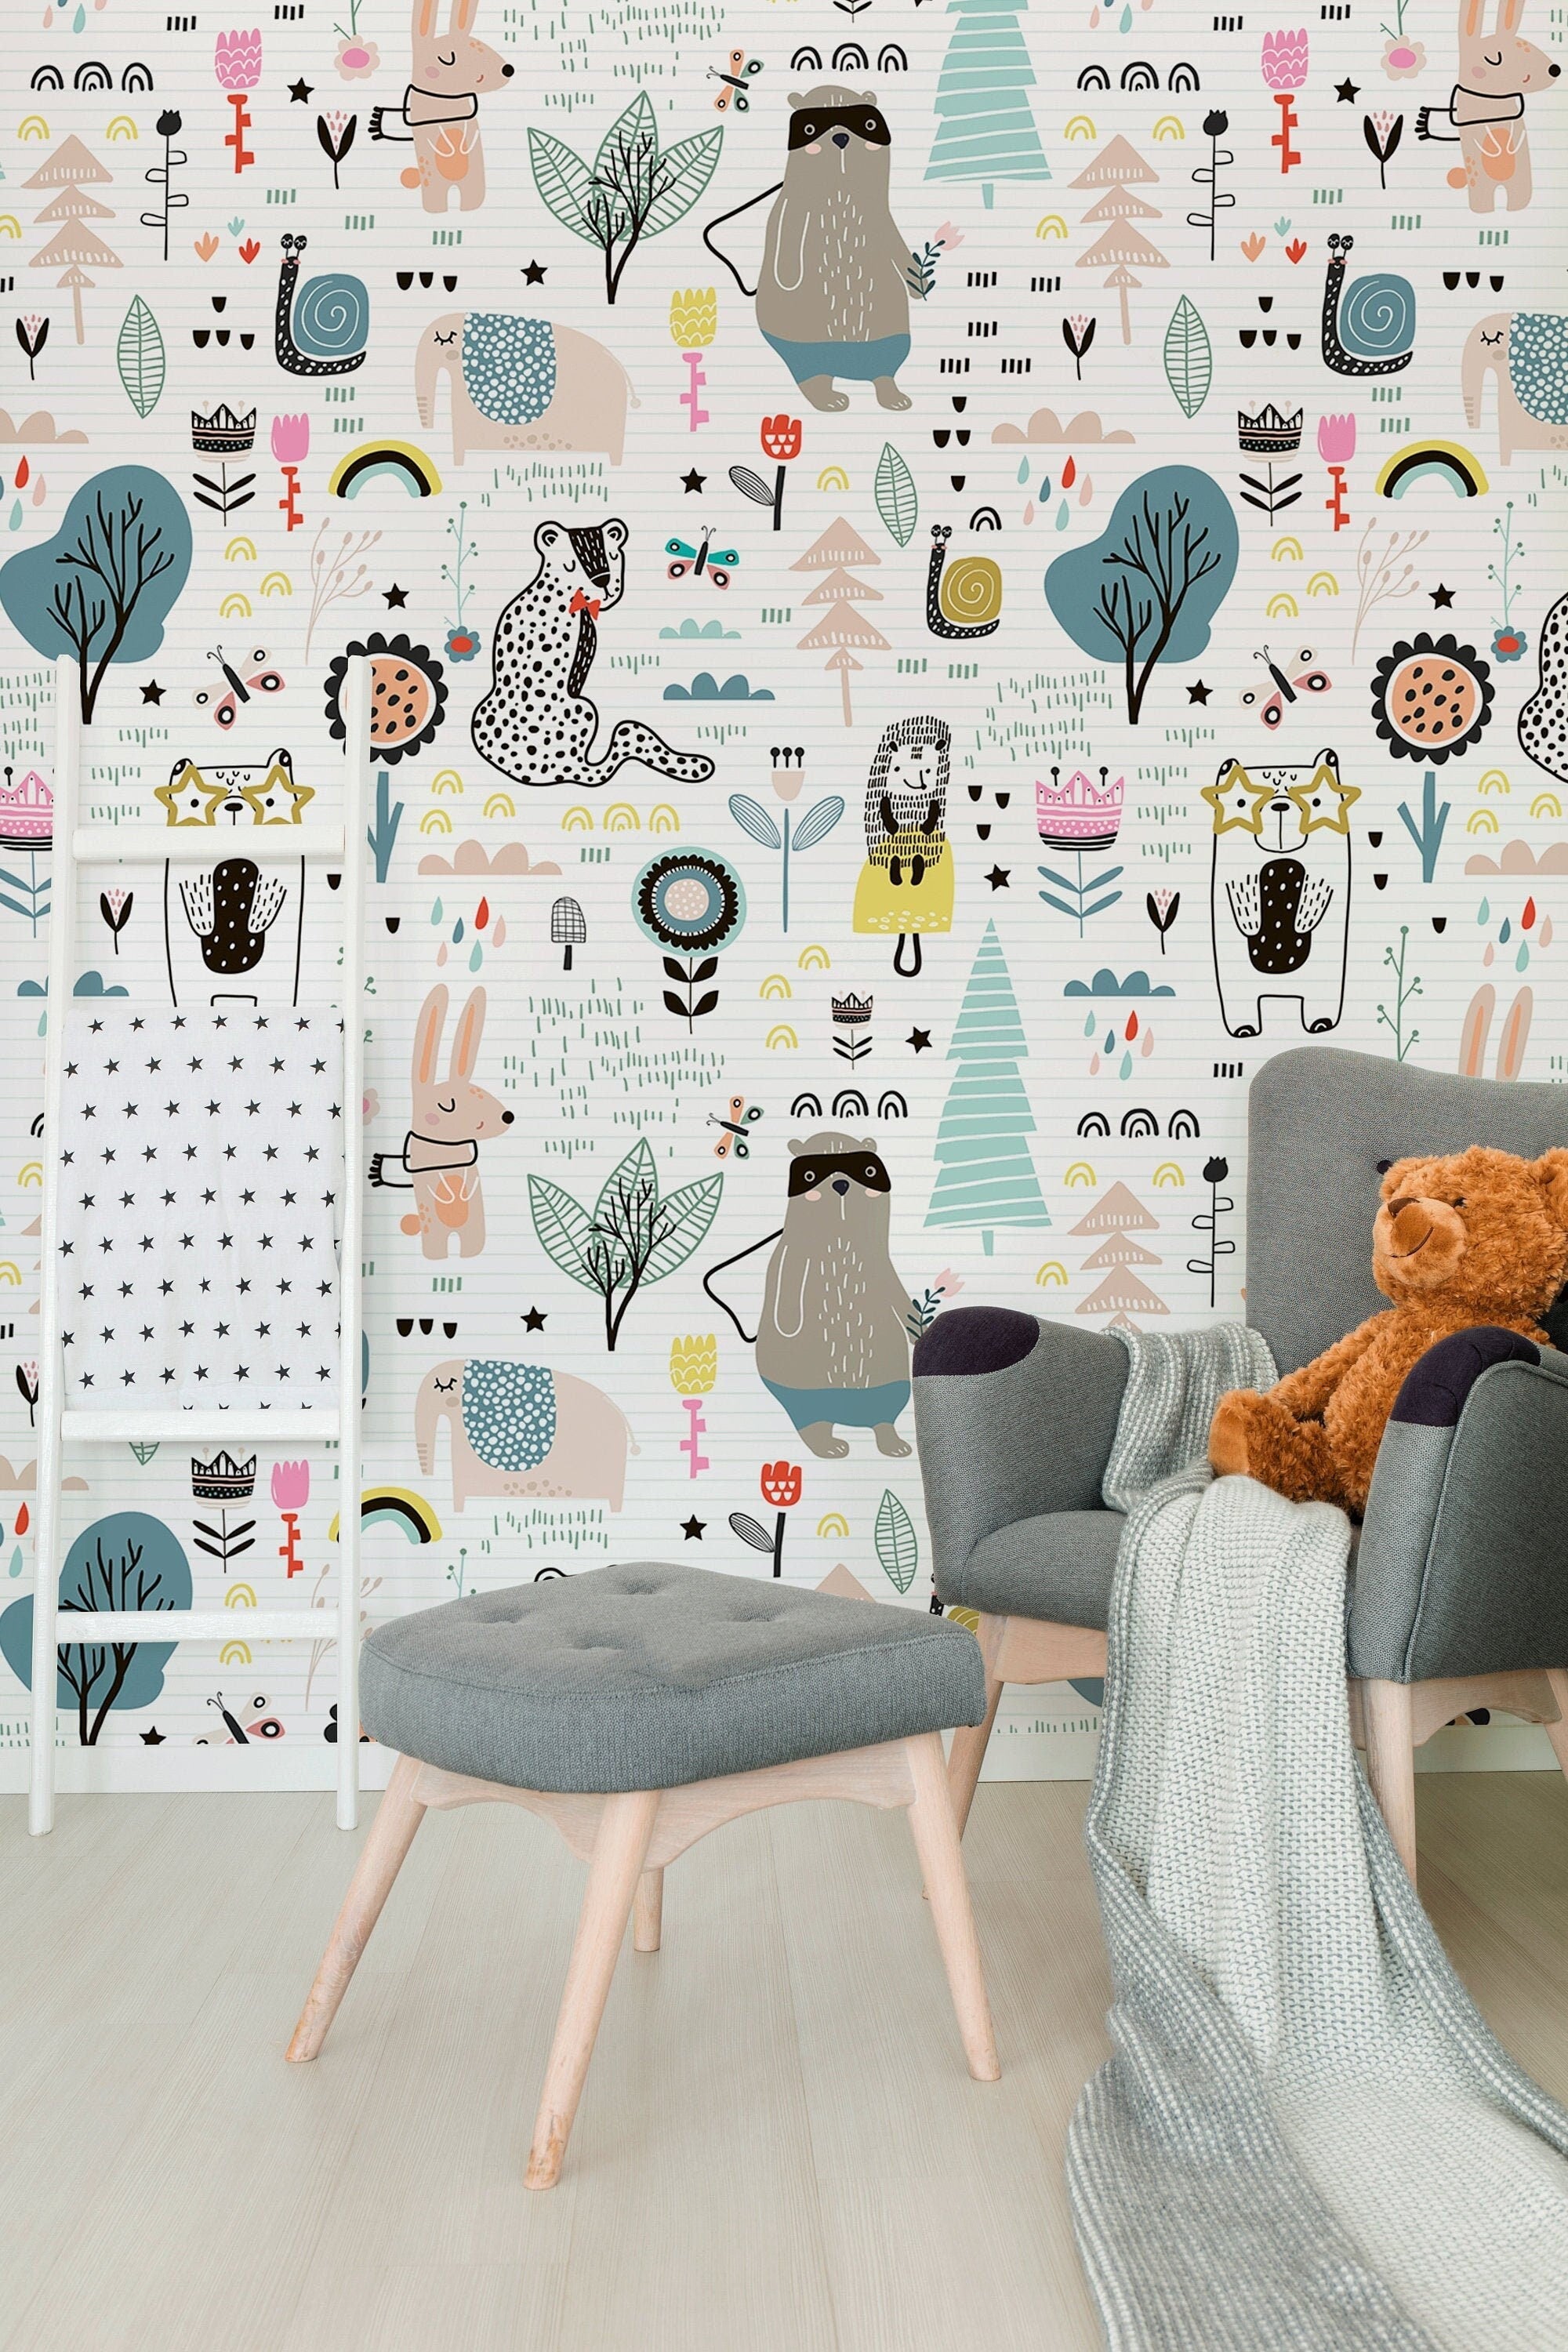 Kids Room Peel and Stick Wallpaper  Removable Self Adhesive